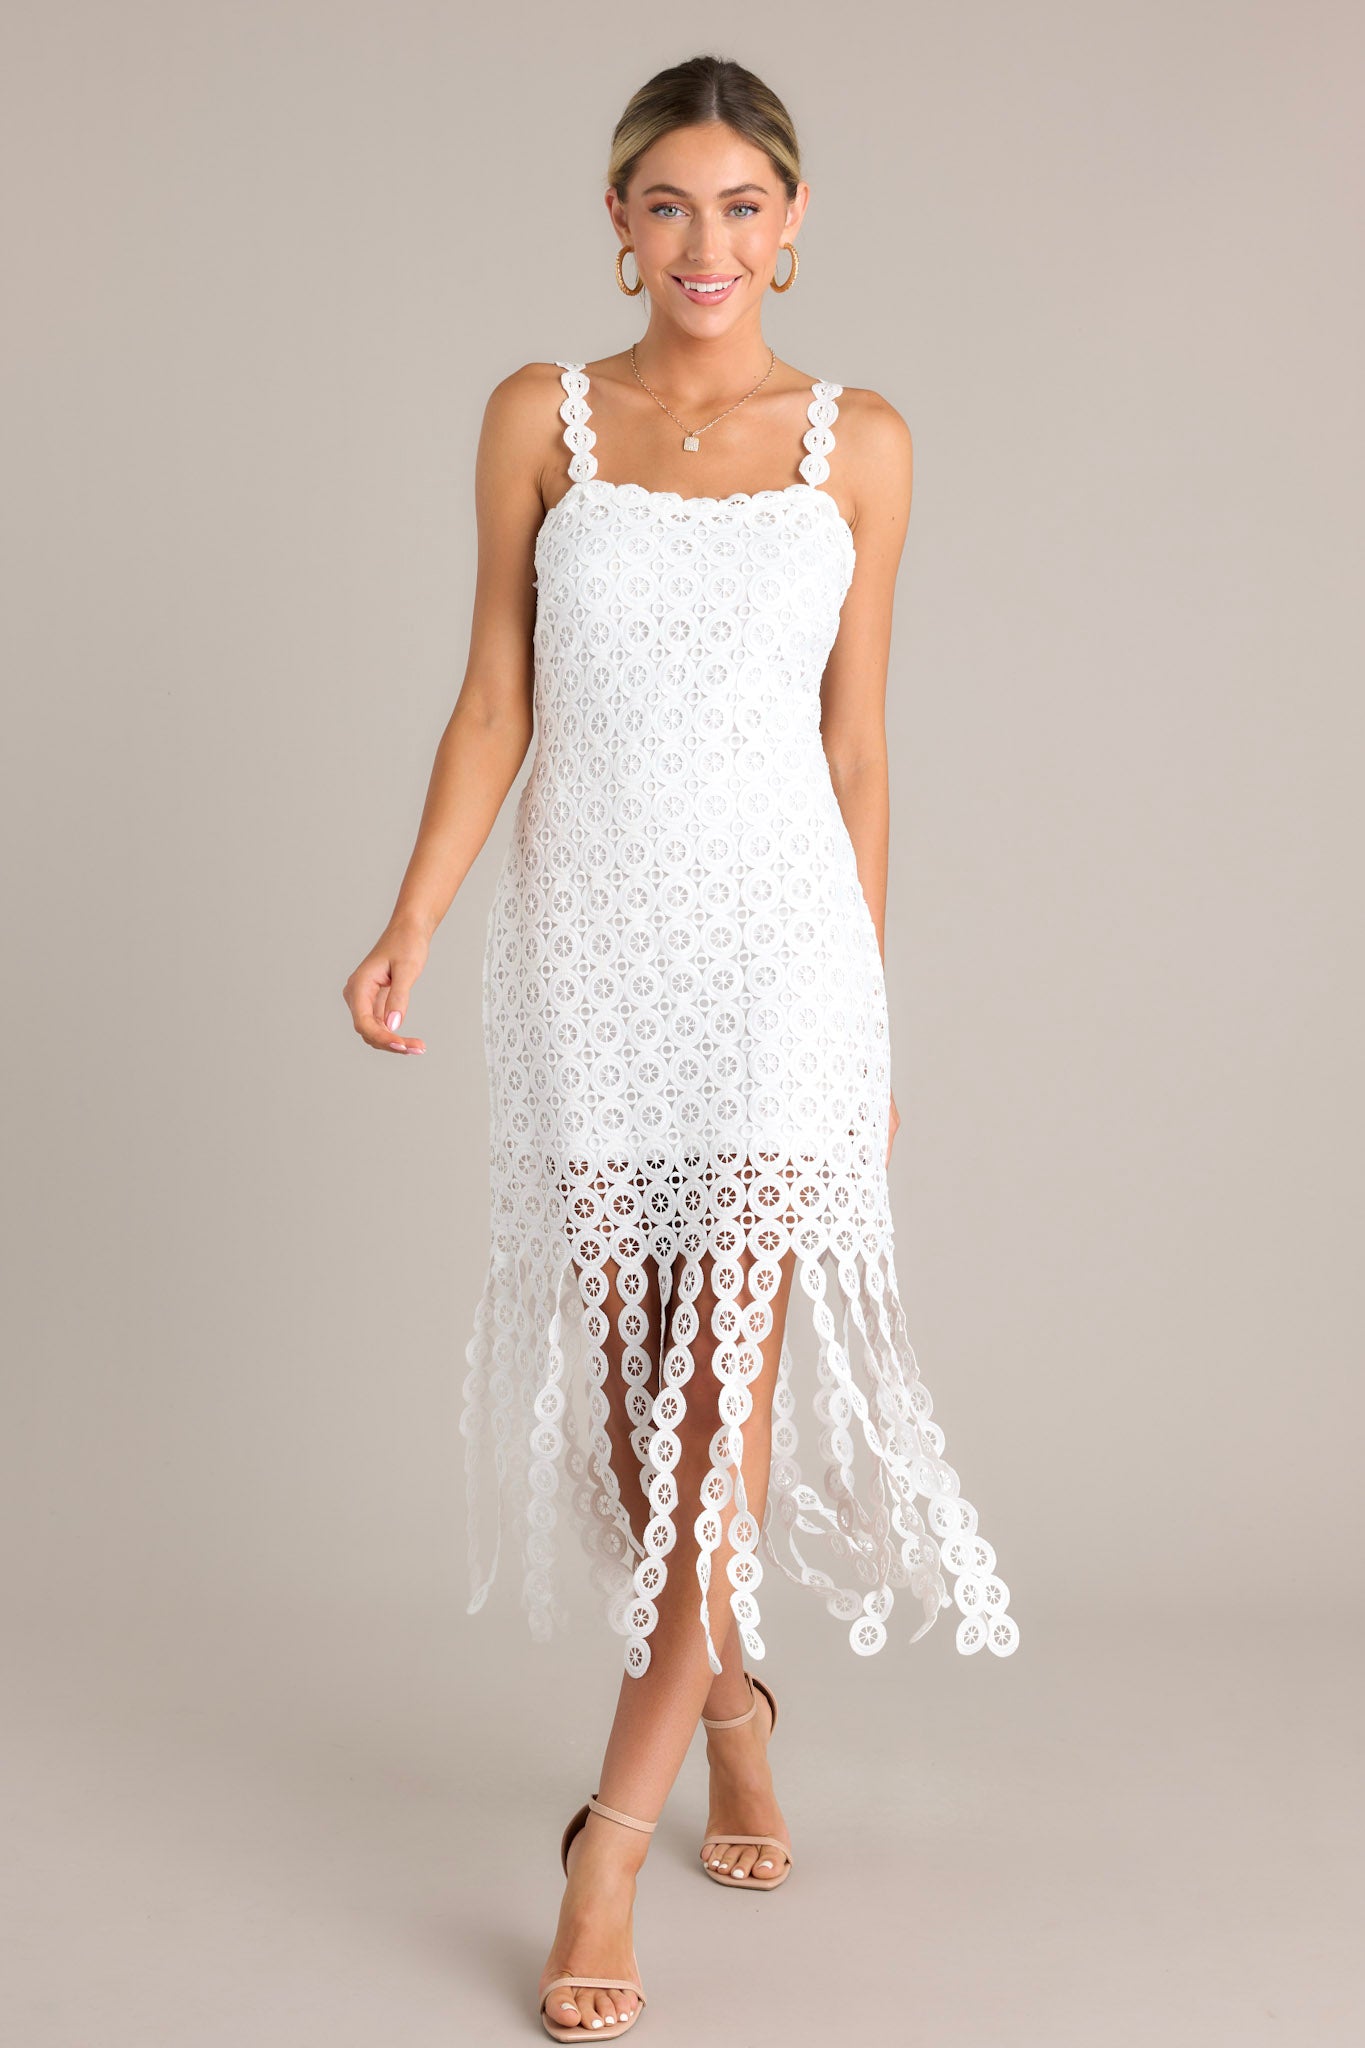 Action shot of a white midi dress with a square neckline, detailed adjustable straps, a discrete side zipper, a unique lace pattern, and detailed hanging fringe, highlighting the dress's flow and movement.